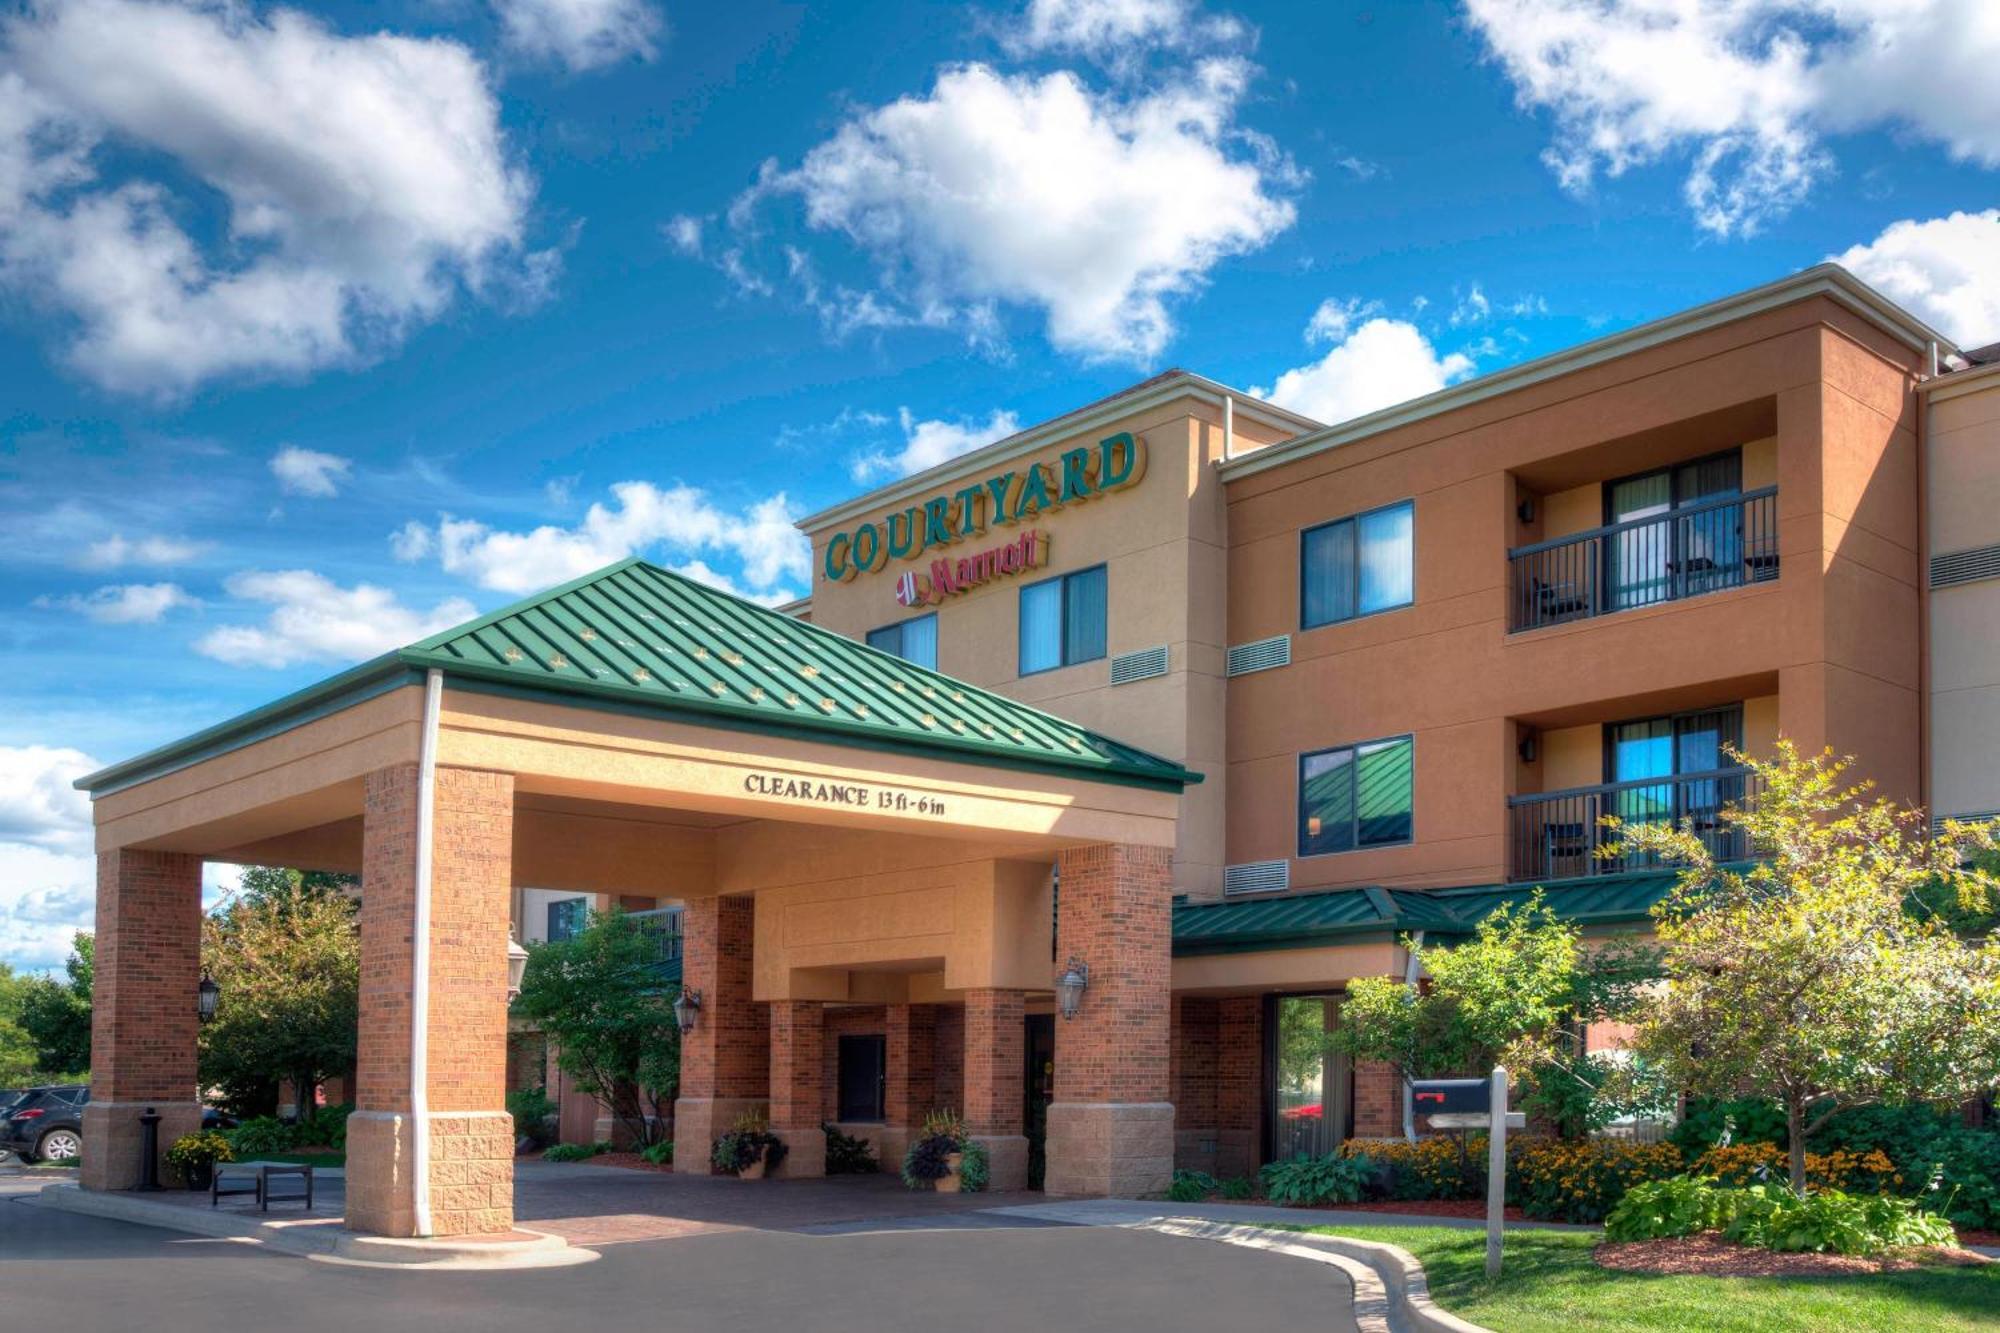 Courtyard By Marriott Traverse City Exterior photo